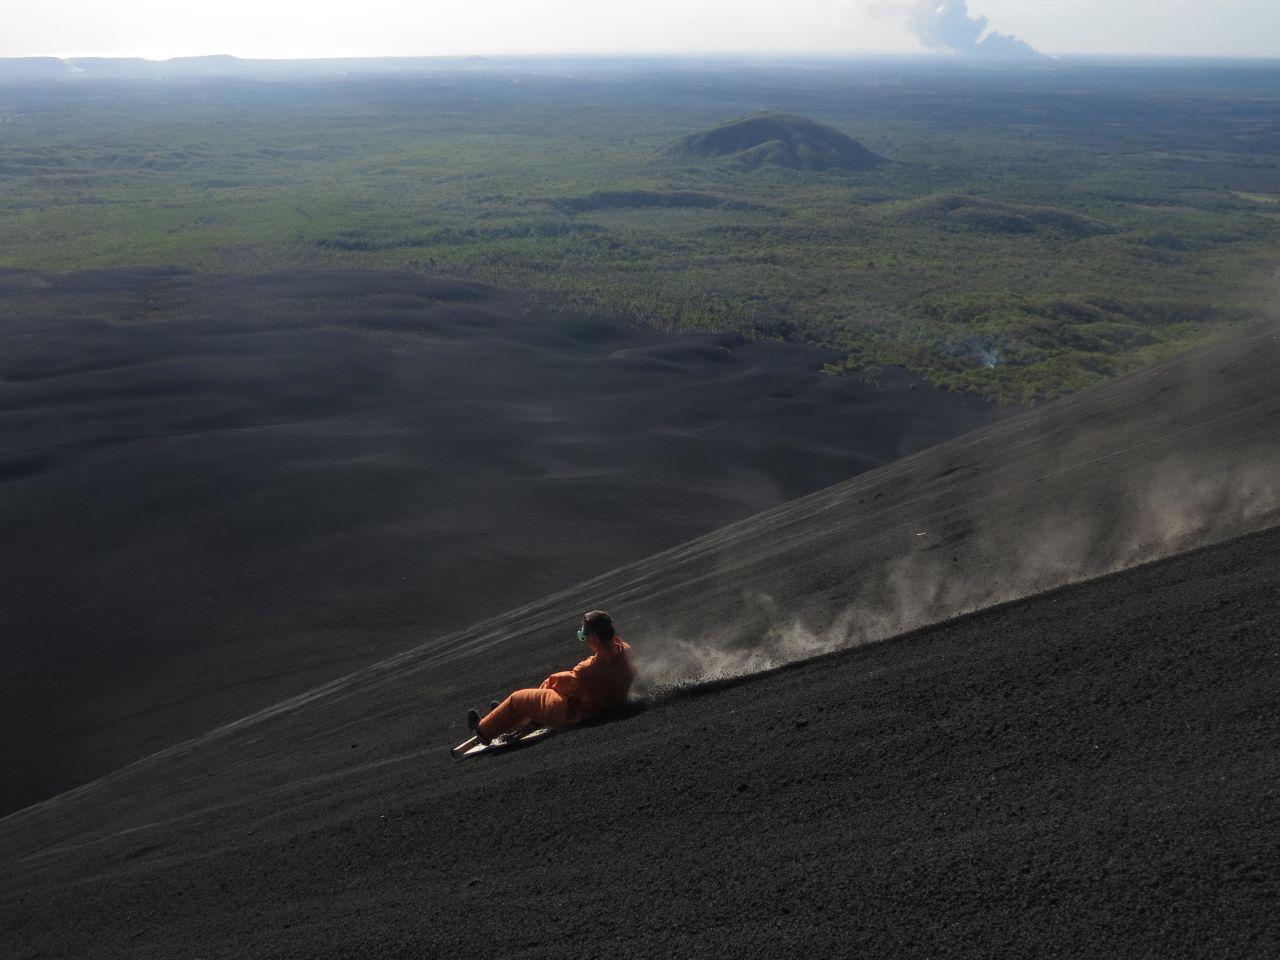 "To our knowledge, volcano boarding is only possible on Cerro Negro," says Timothy Brauning of Bigfoot tour company. "In parts of South America, and other parts of the world, there is something called 'sand boarding,' but this is nothing like volcano boarding."